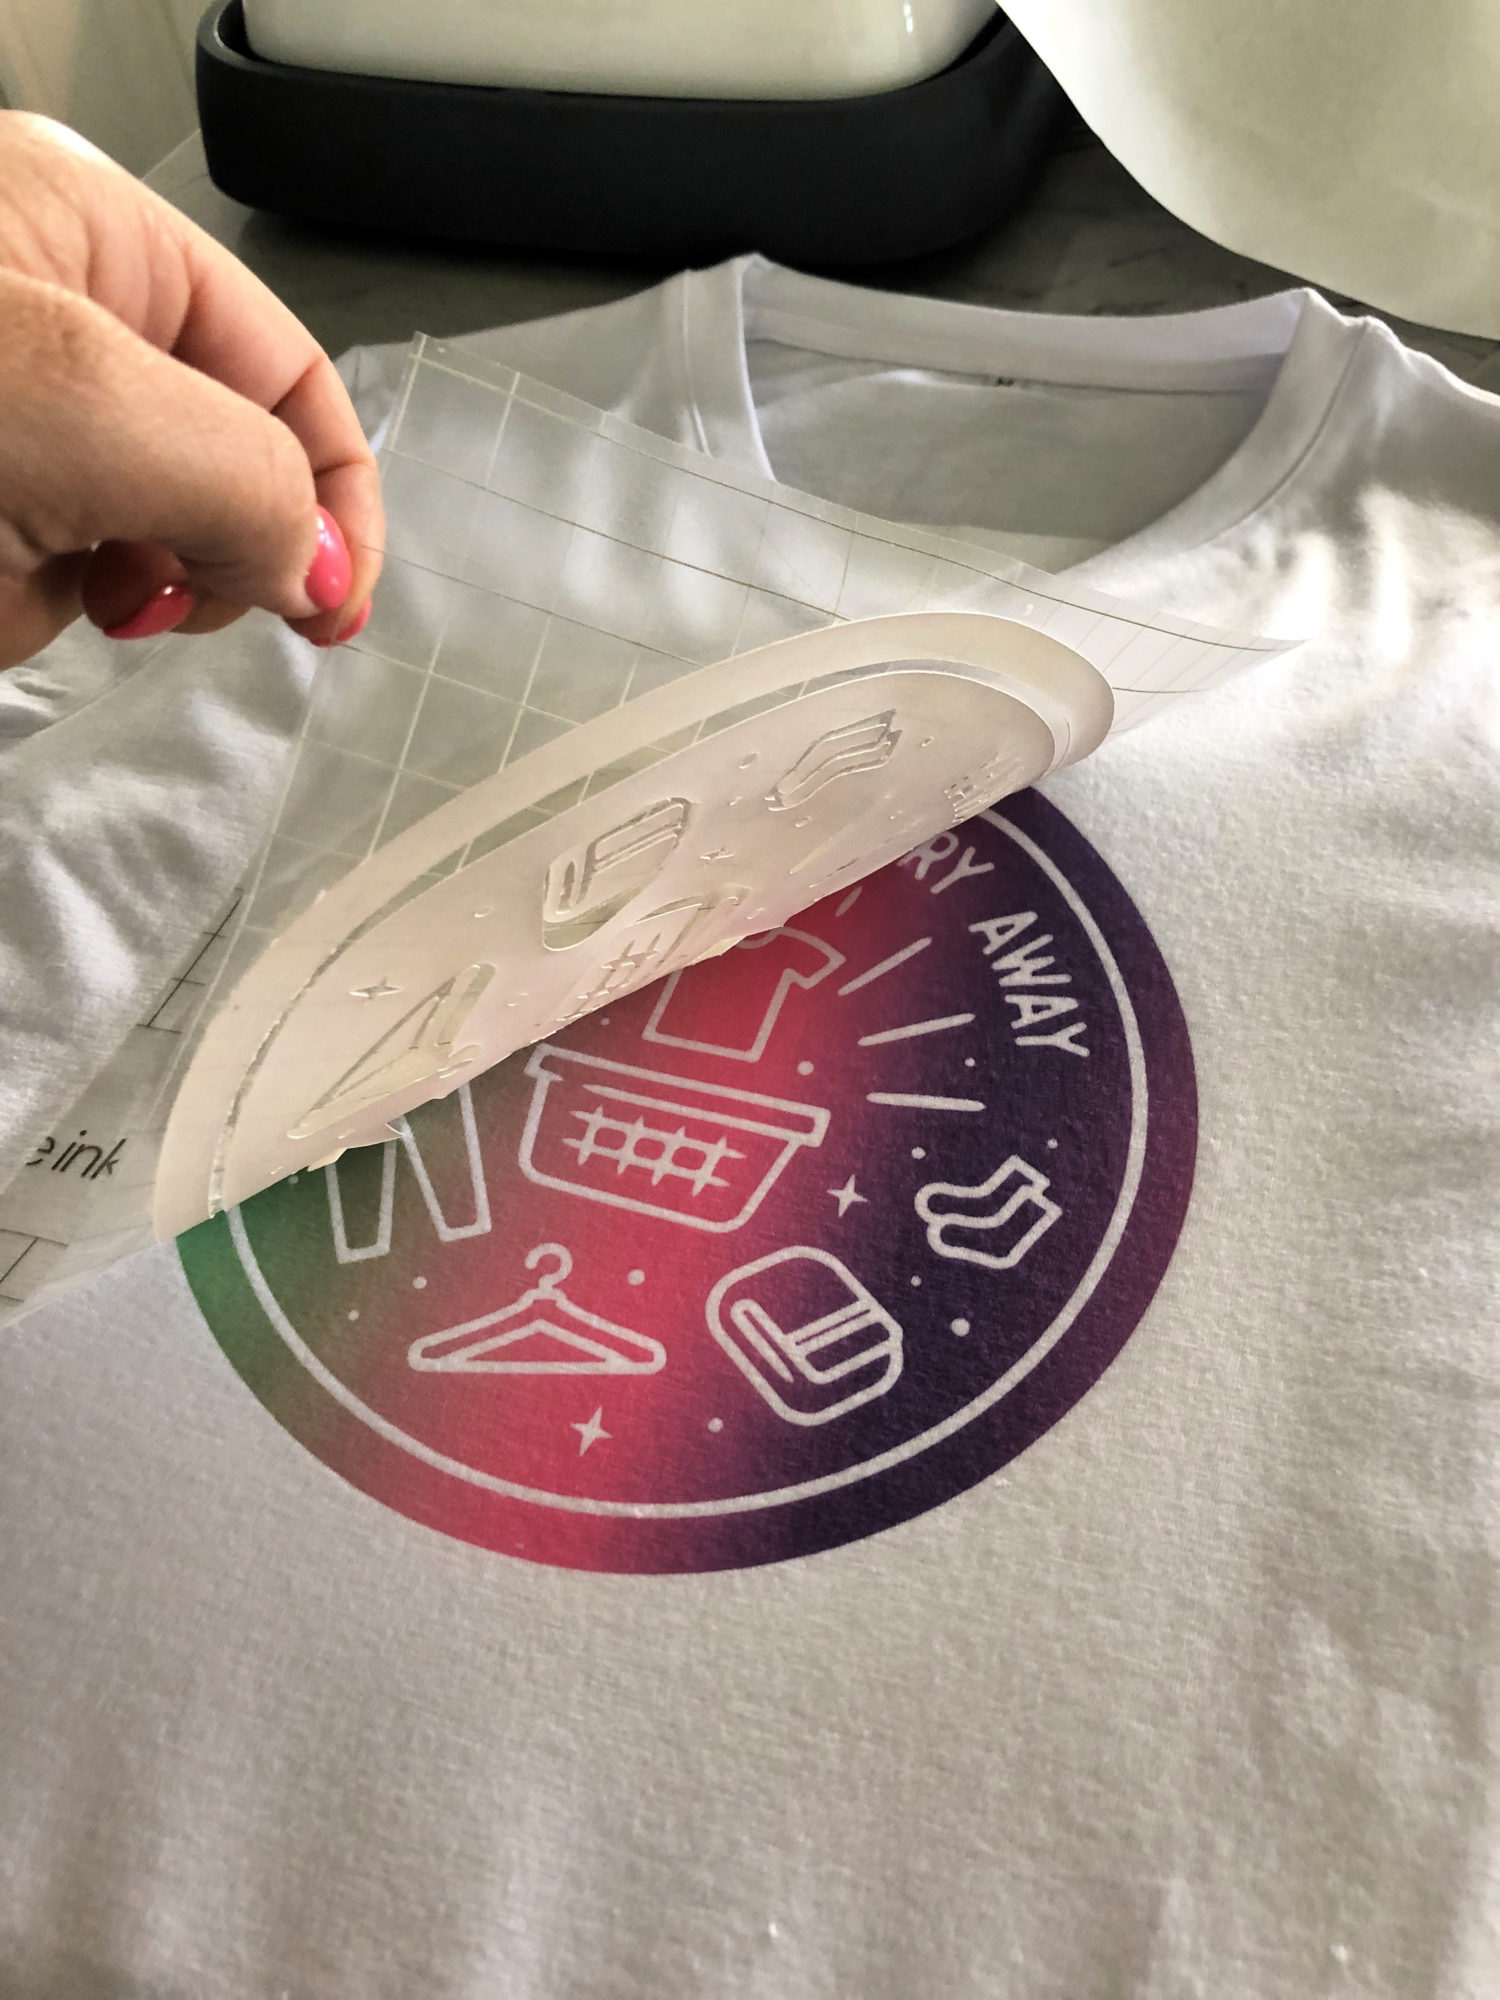 Cricut Infusible Ink vs Iron-On Everything You Need To Know